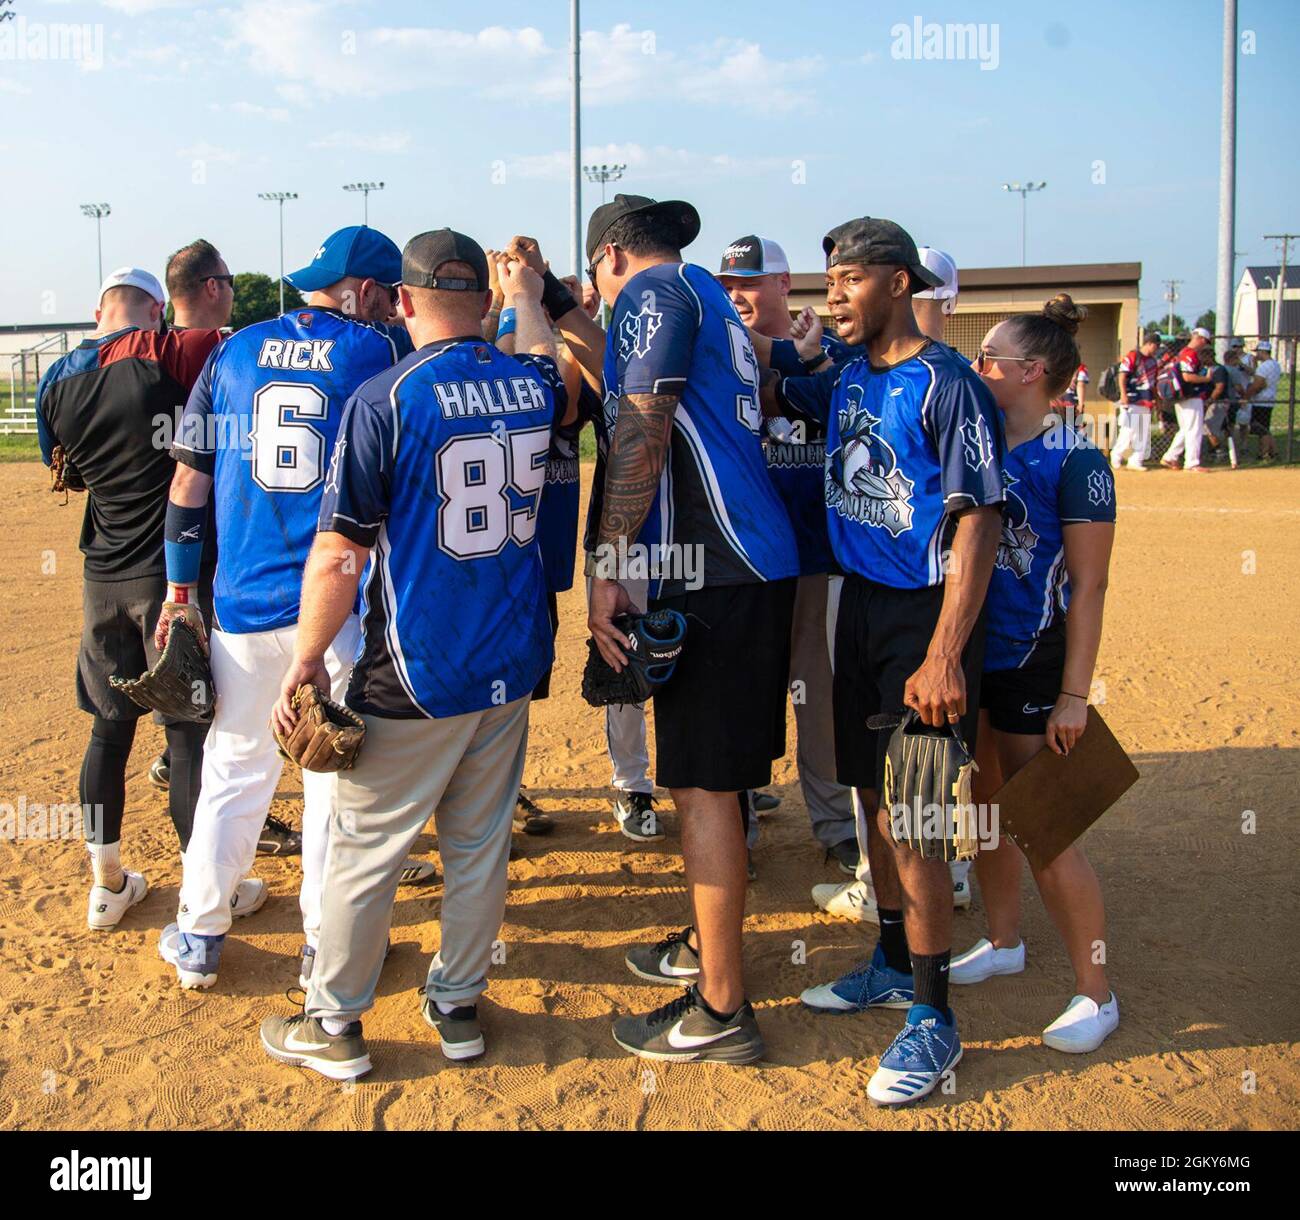 Airmen from the 436th Security Forces Squadron cheer after winning their intramural softball game on Dover Air Force Base, Delaware, July 26, 2021. The 436th SFS won the game 13-4. Stock Photo